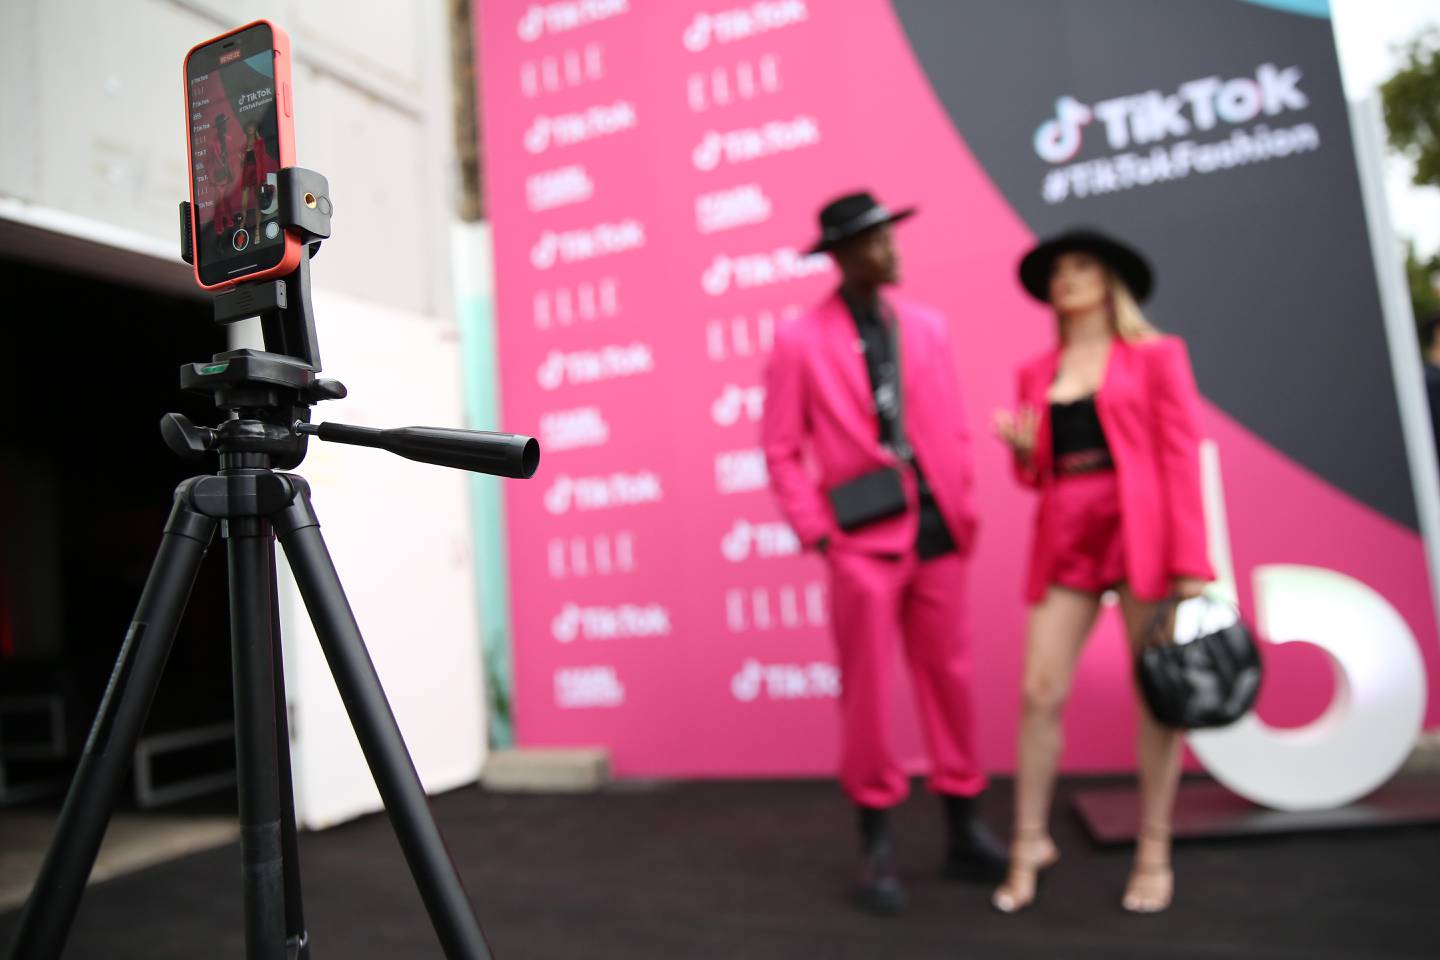 Participants walking along a red carpet as they attend TikTok's "The Future of Fashion" event in Berlin.